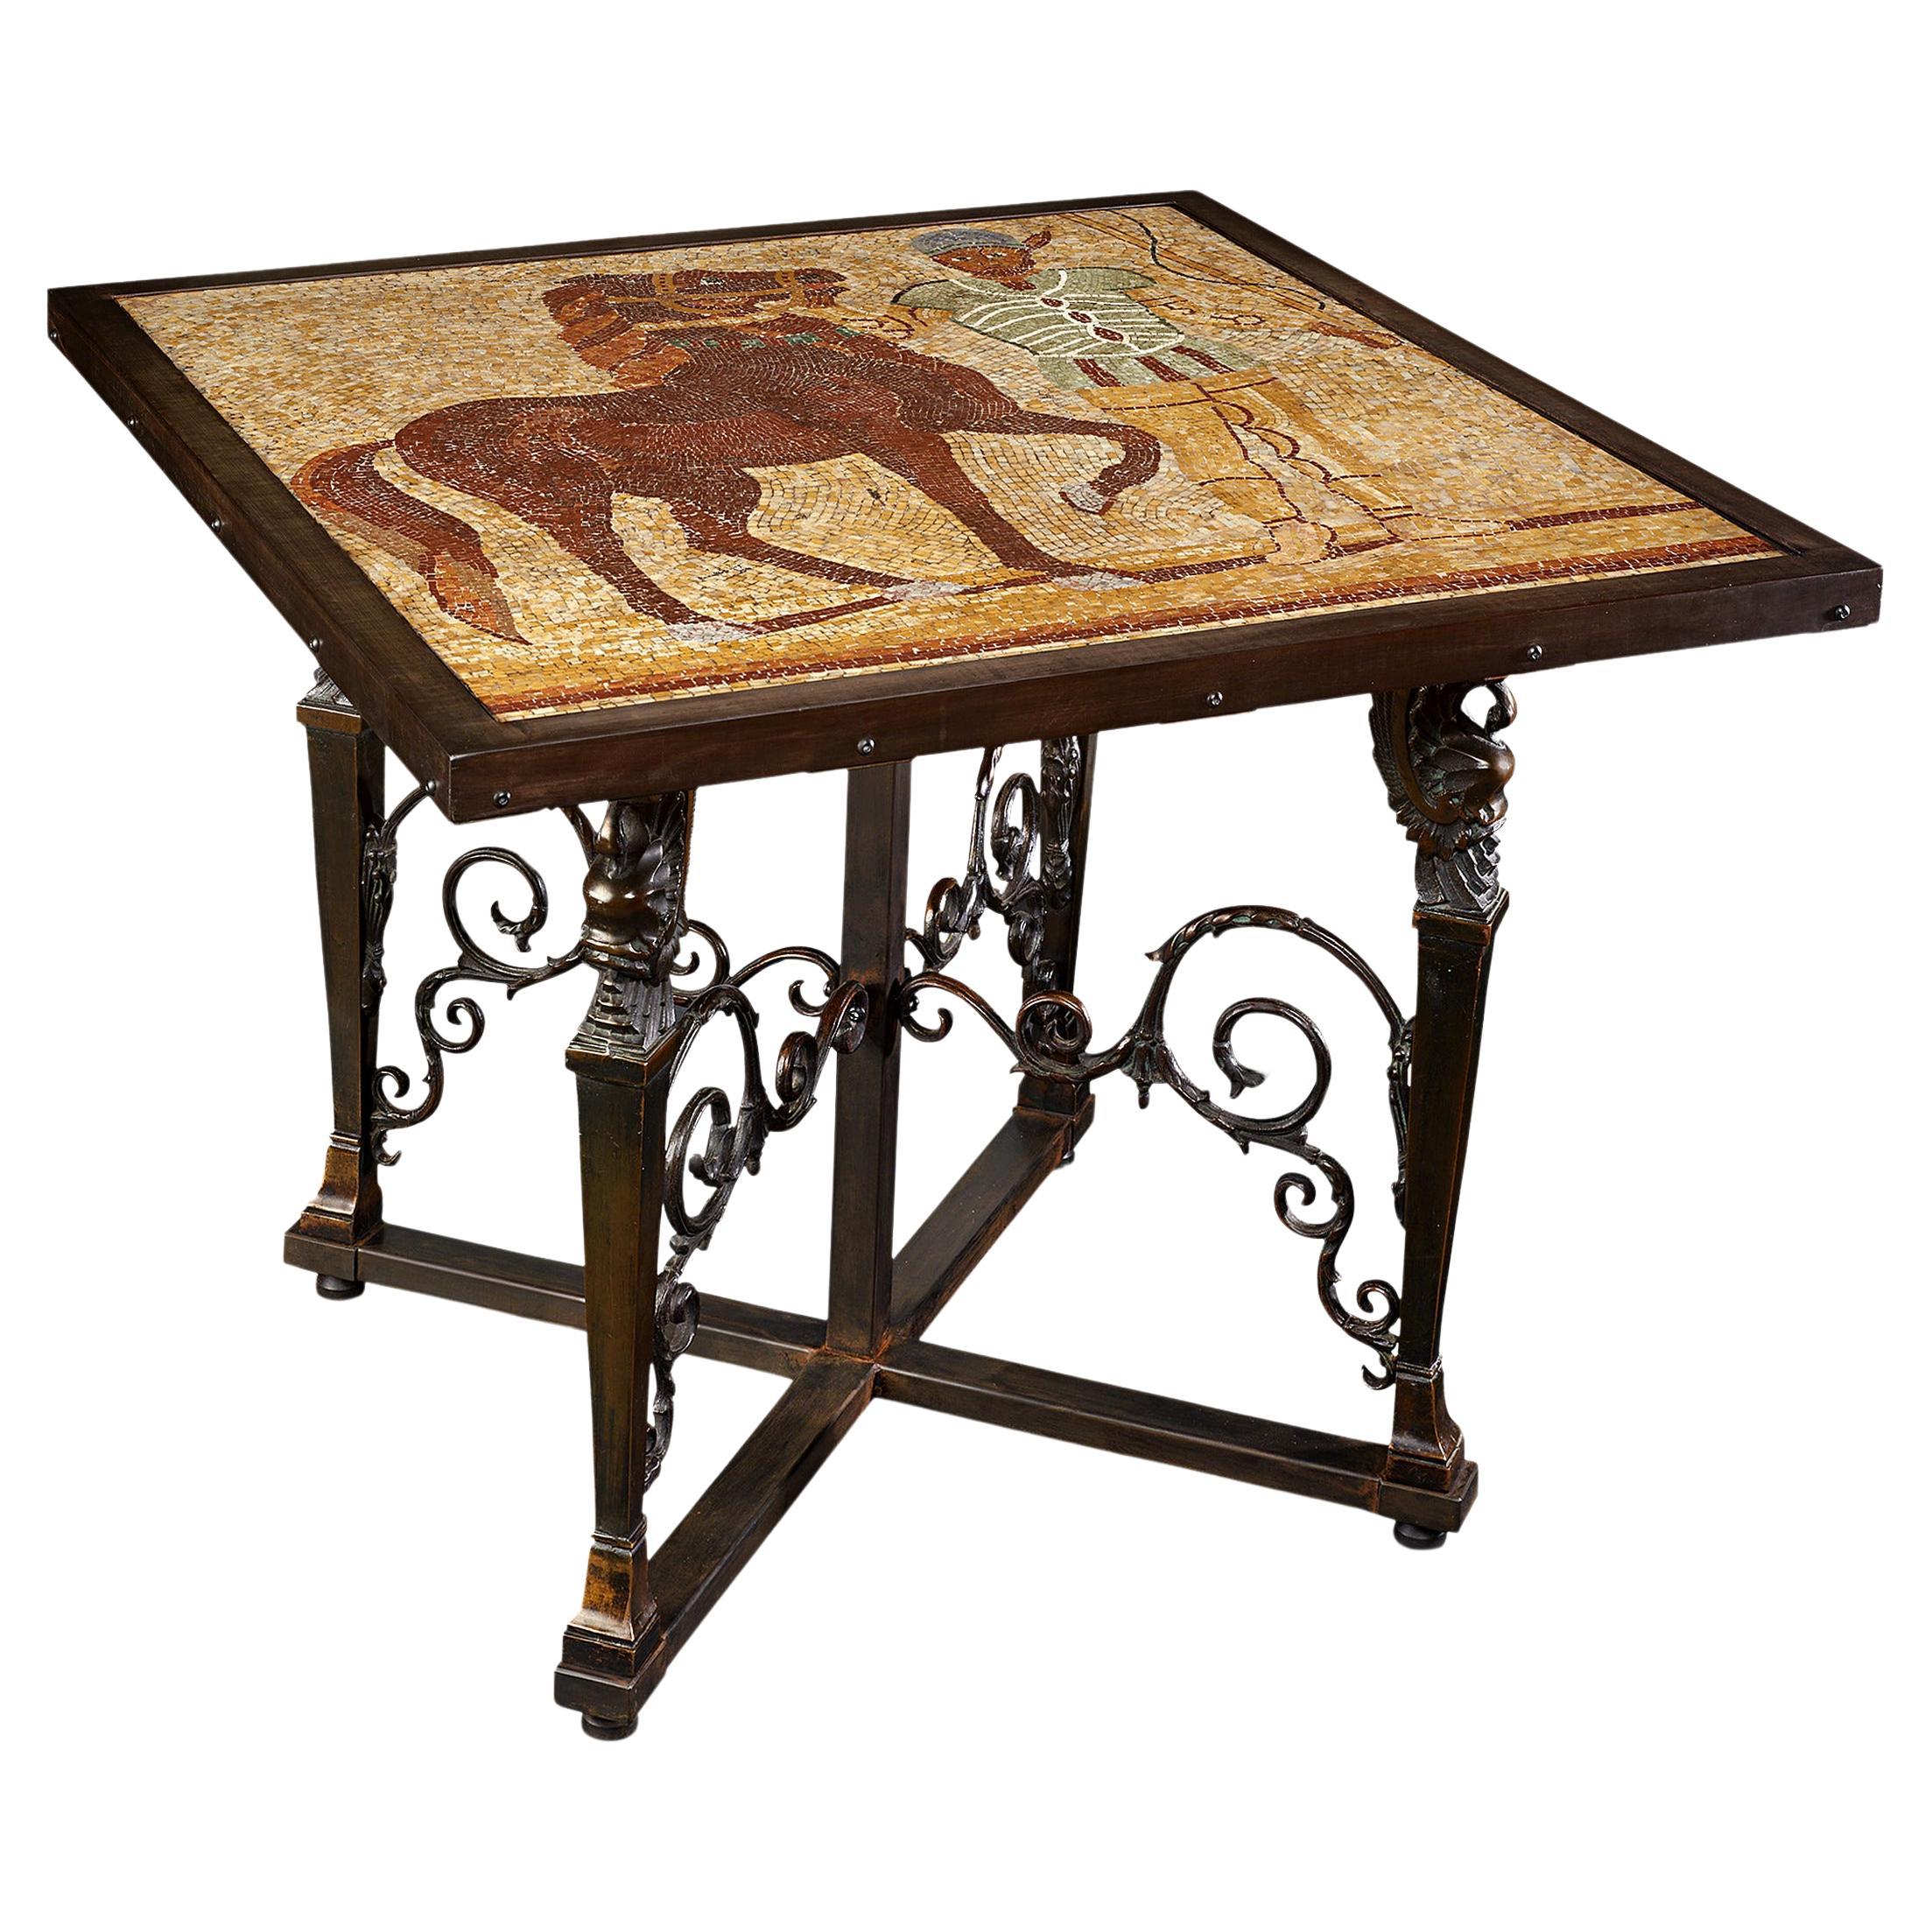 Roman Empire Charioteer Mosaic Table For Sale